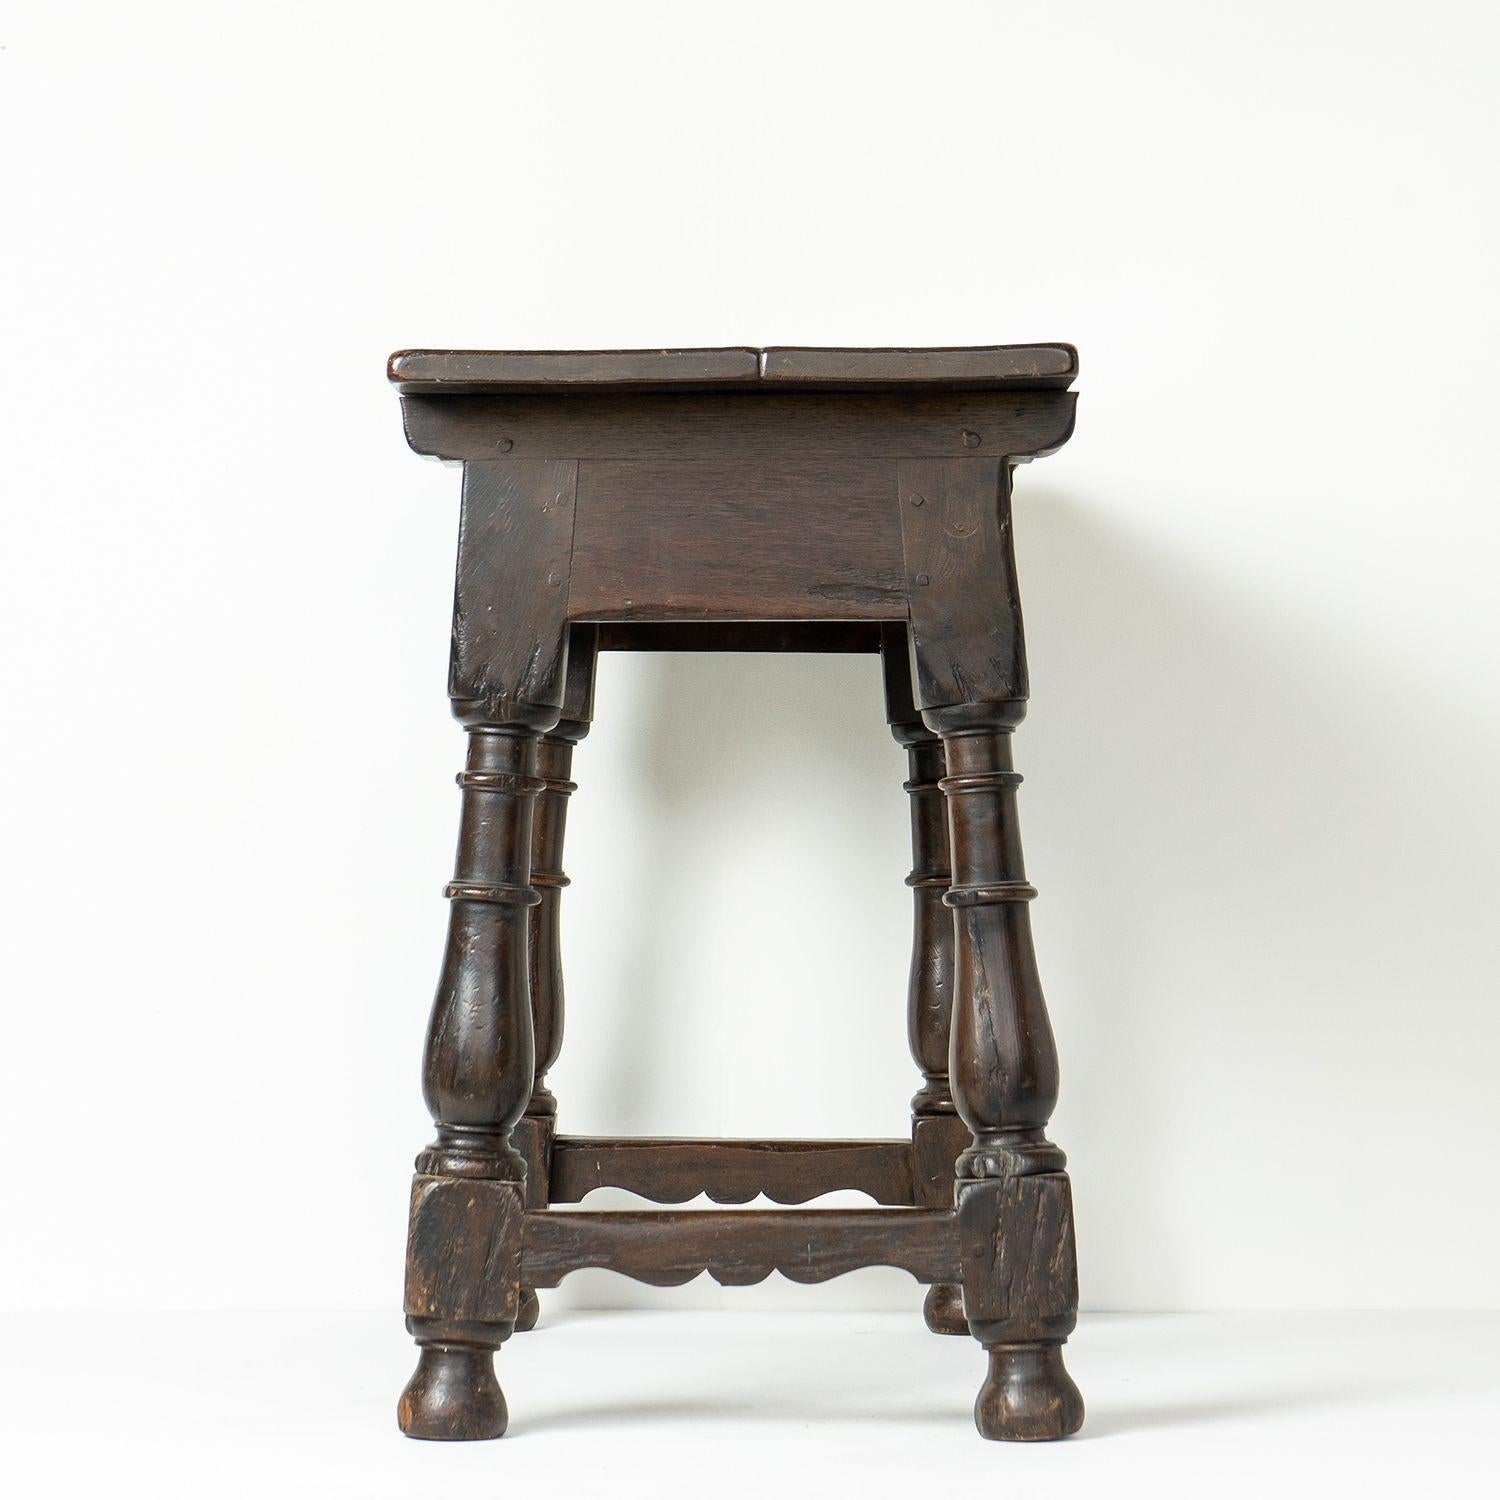 Antique Chunky Spanish Baroque Oak Side Table with Baluster Legs, 17th Century For Sale 7